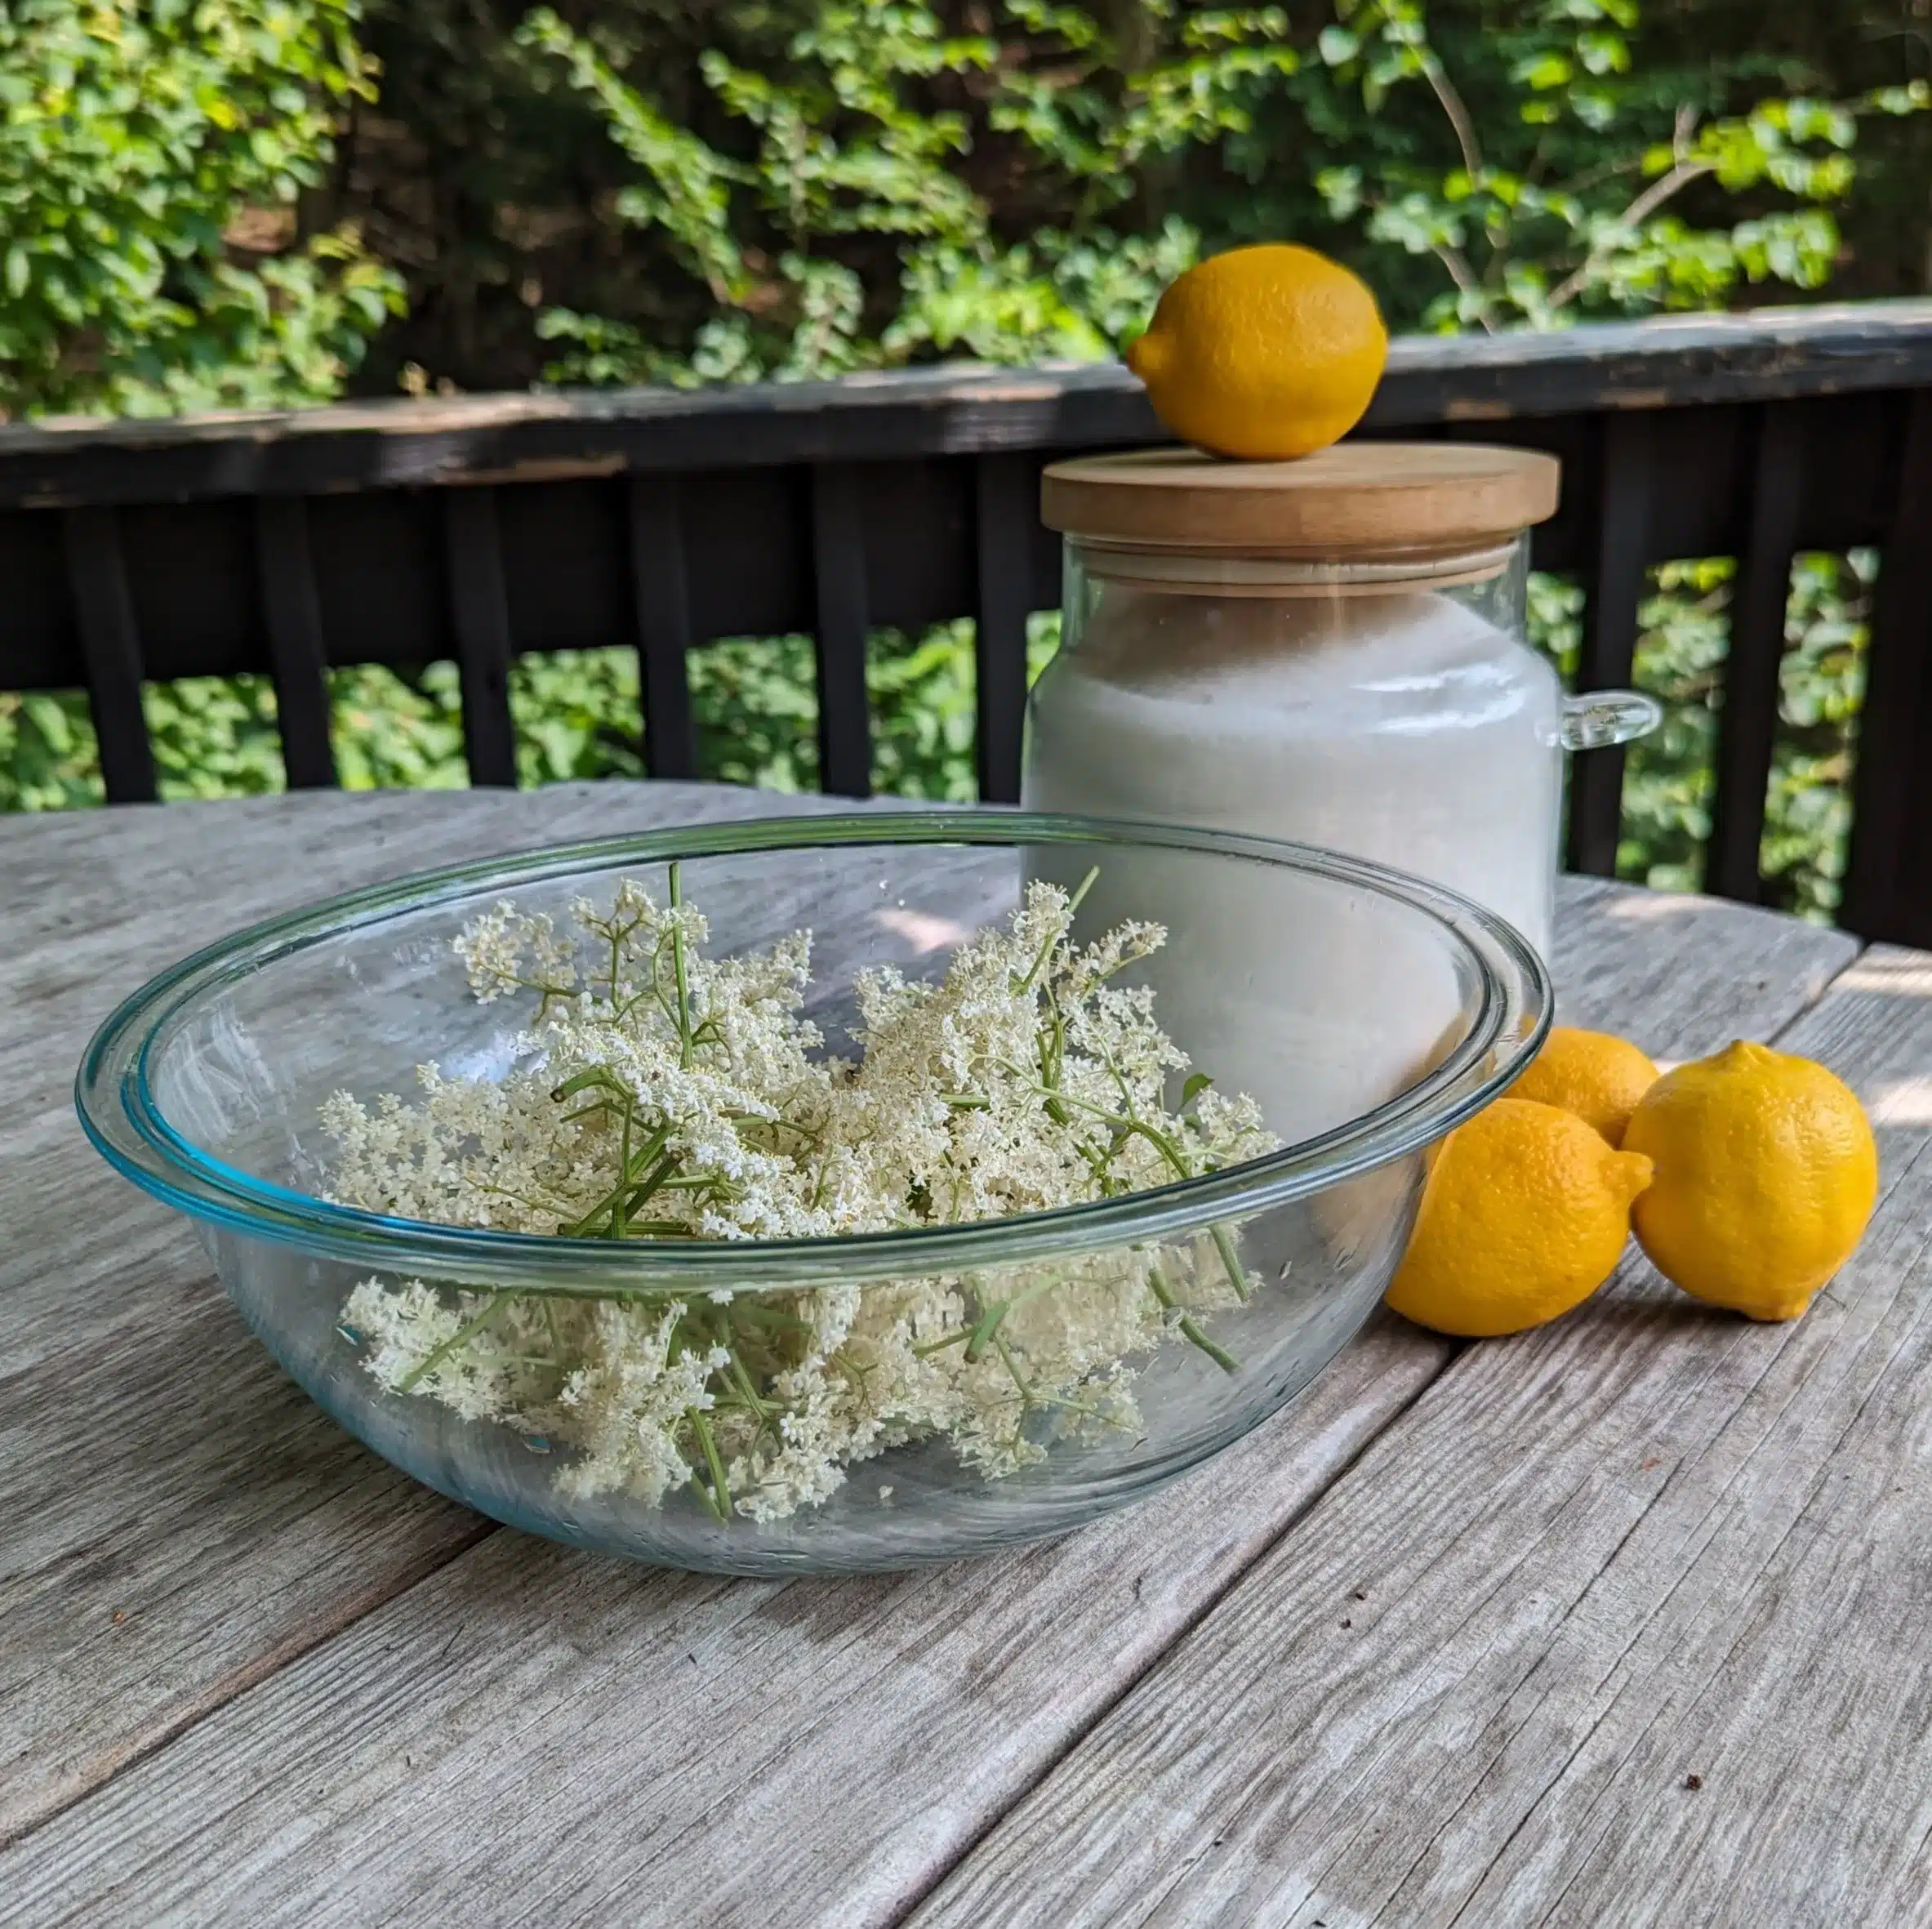 A bowl of elderflowers, four lemons and a canister of sugar.